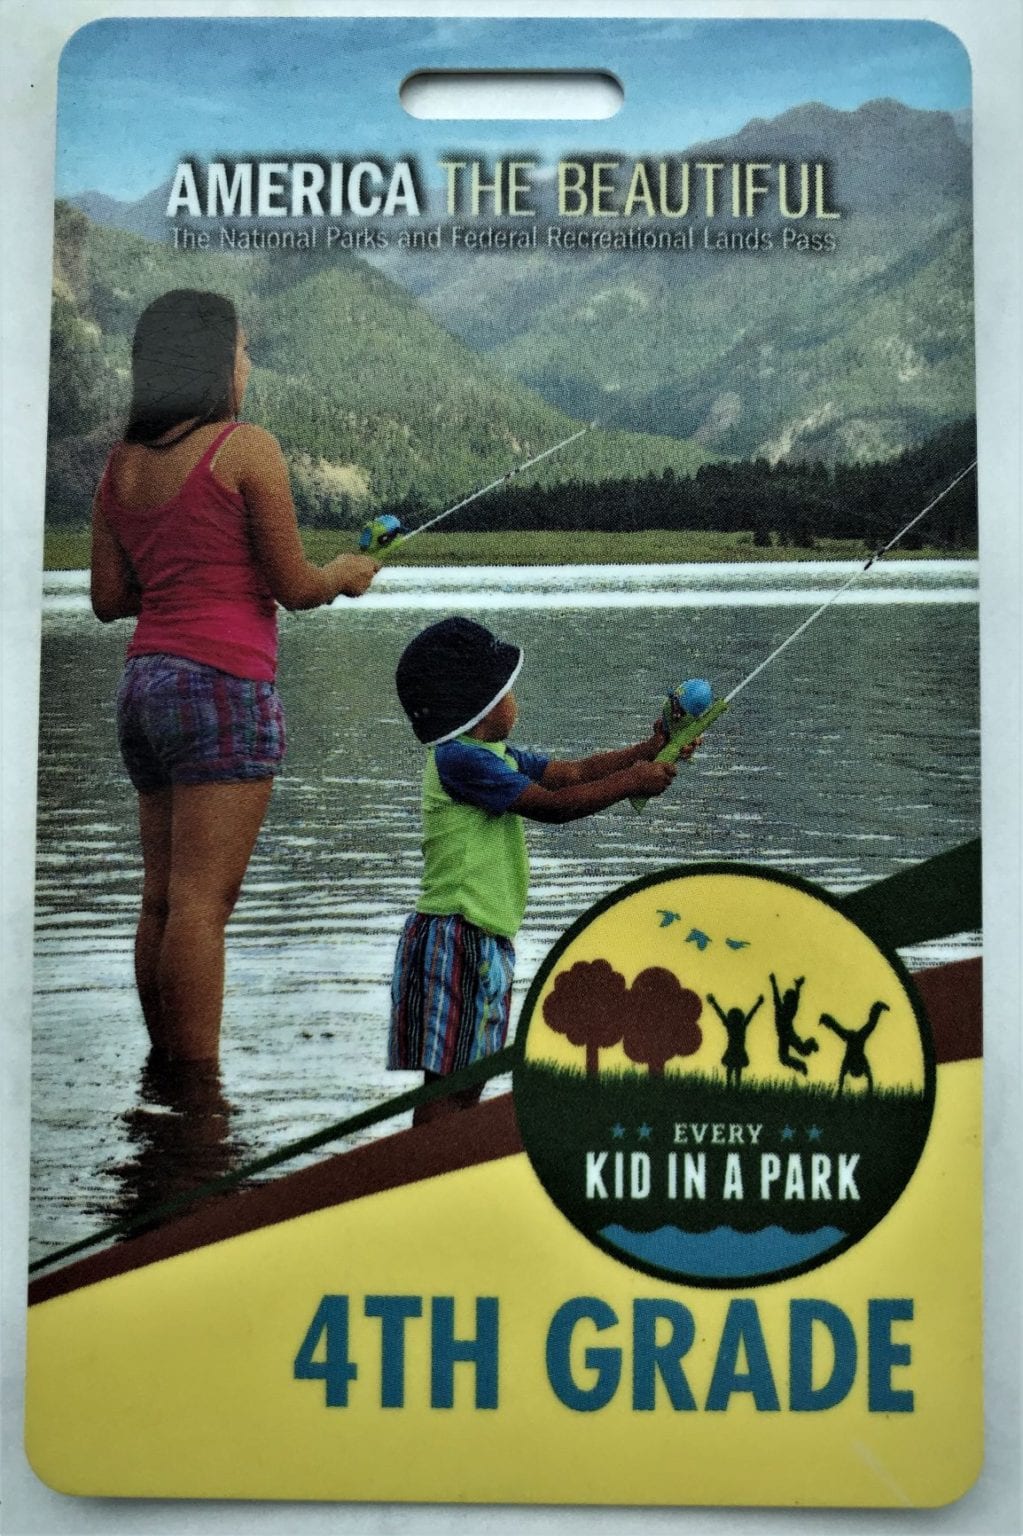 Discover the (Free) 4th Grade National Park Pass! +7 More Ways to Save